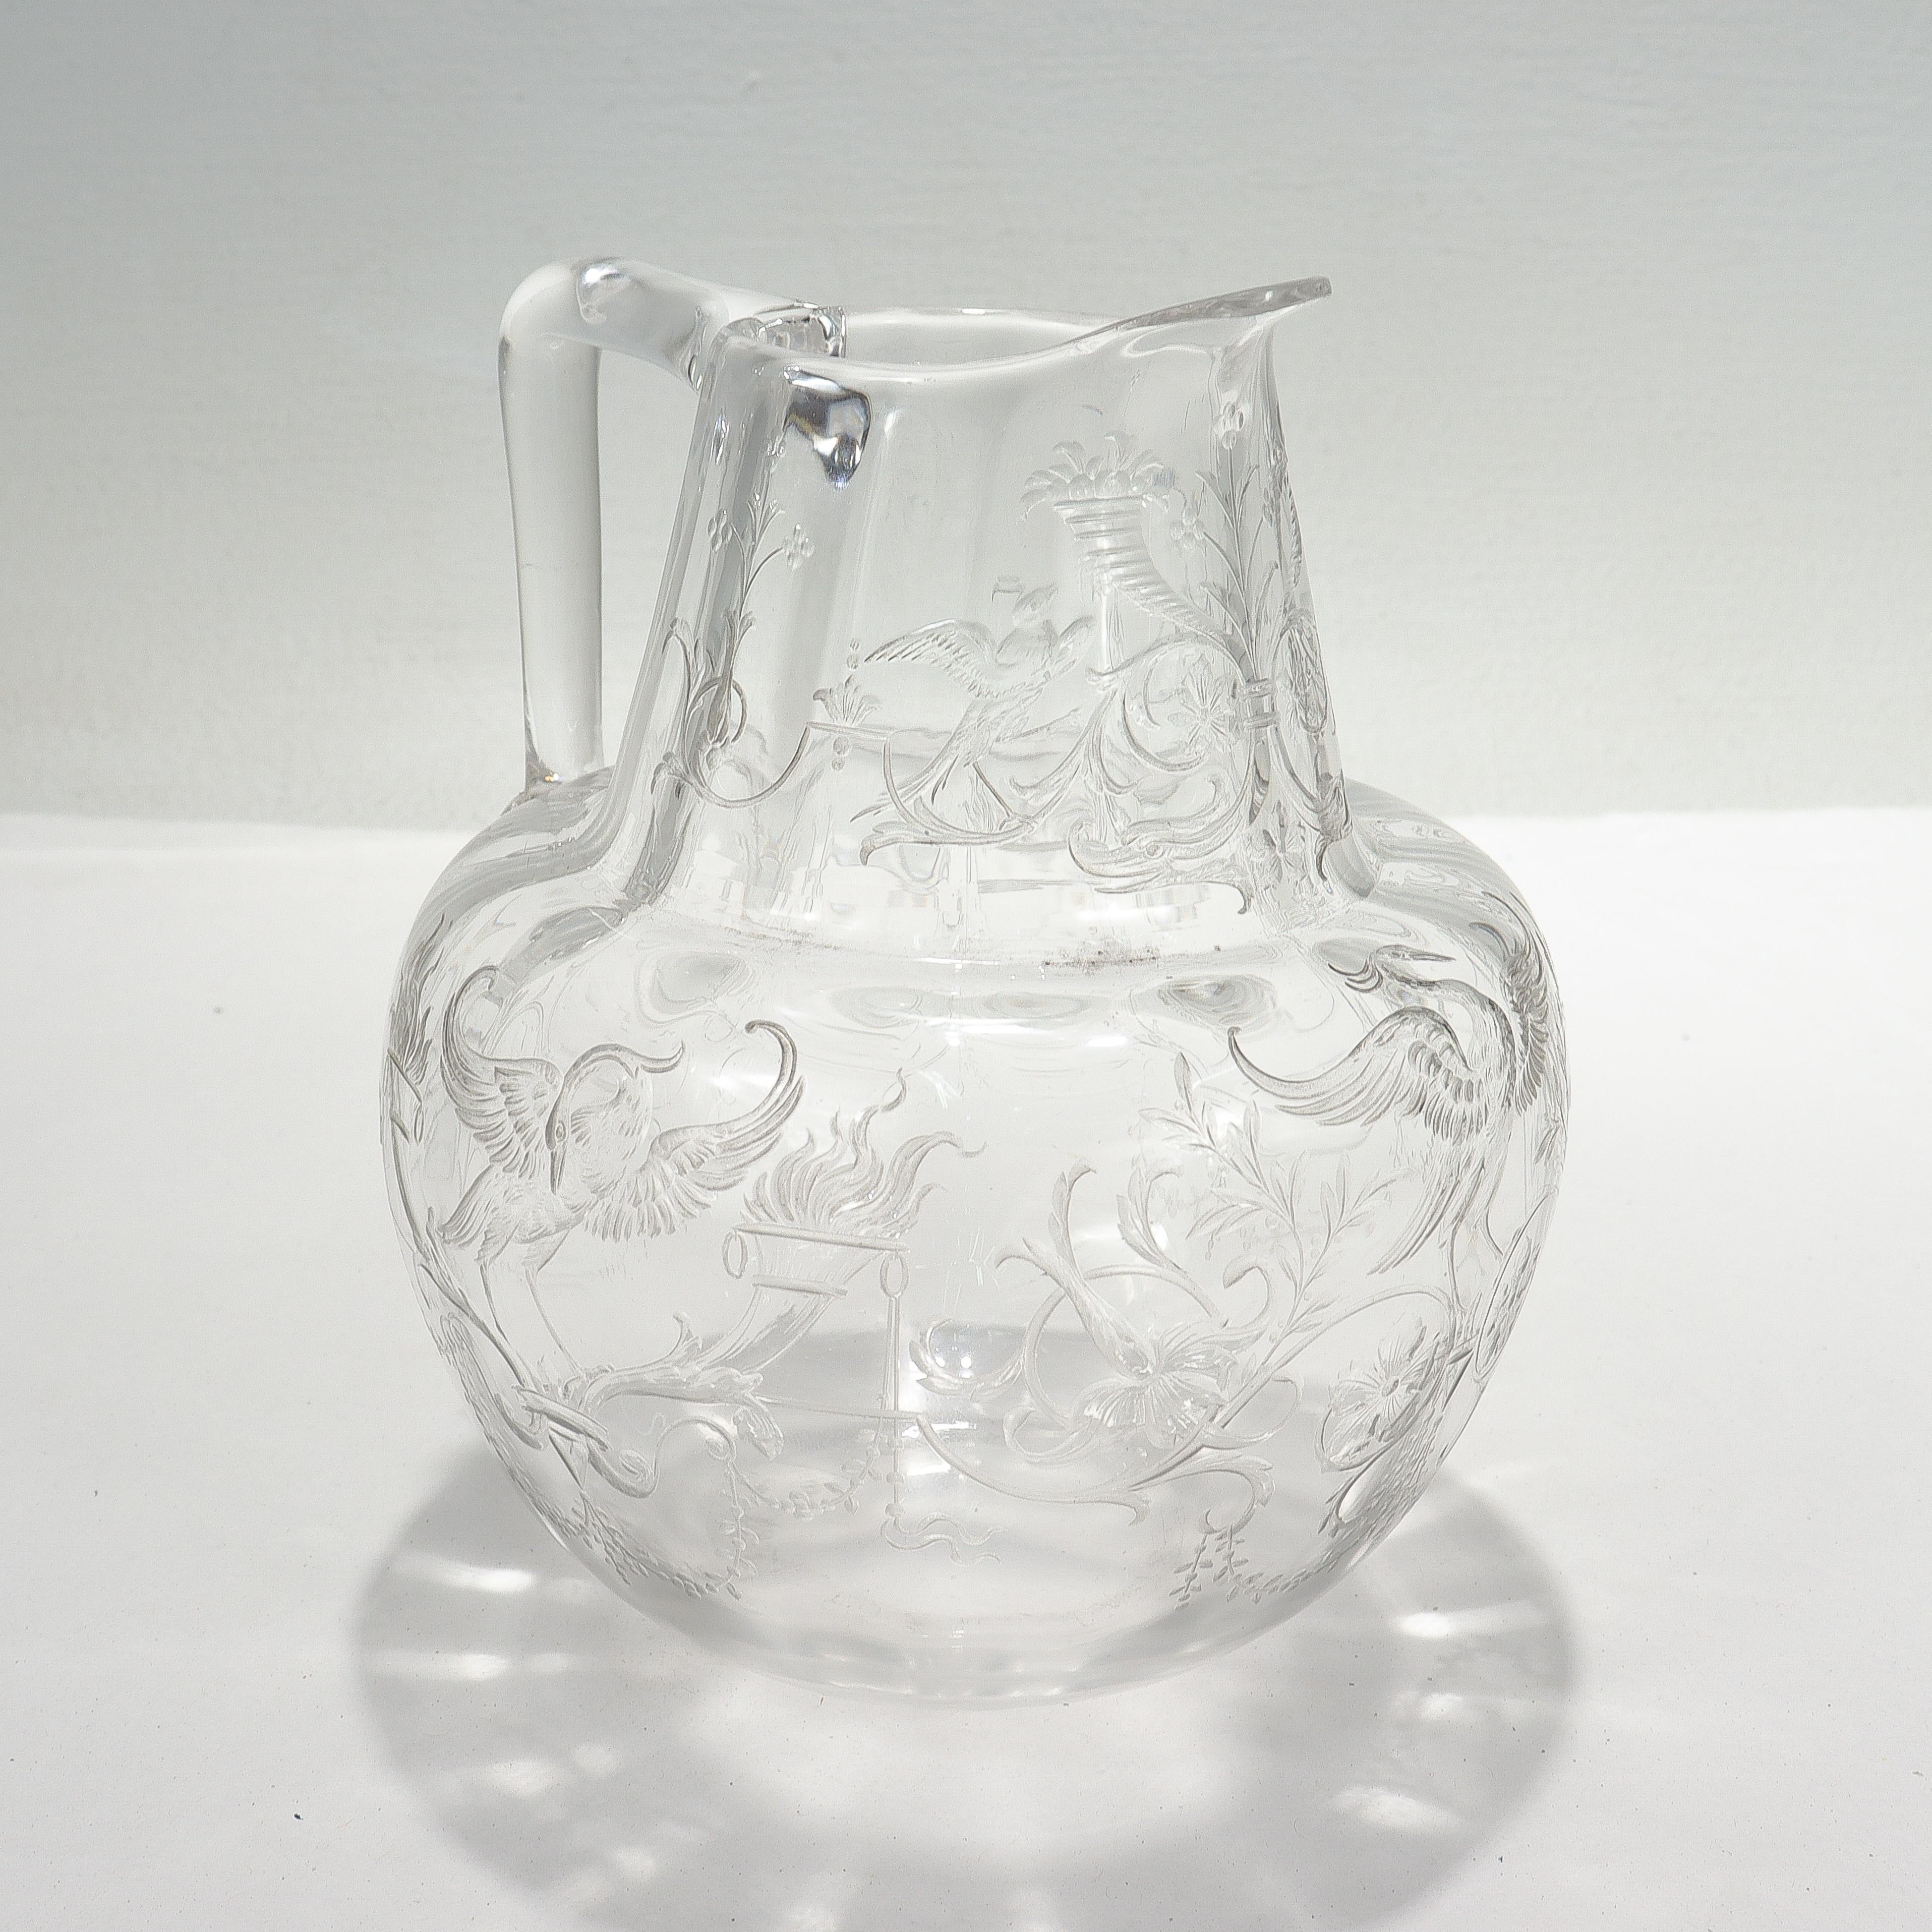 A fine antique English cut glass water pitcher.

Attributed to Stevens & Williams.

In a water or juice pitcher size.

Engraved with designs of phoenixes, birds, cornucopia, flowers, and trellis work.

Simply a wonderful antique Stourbridge